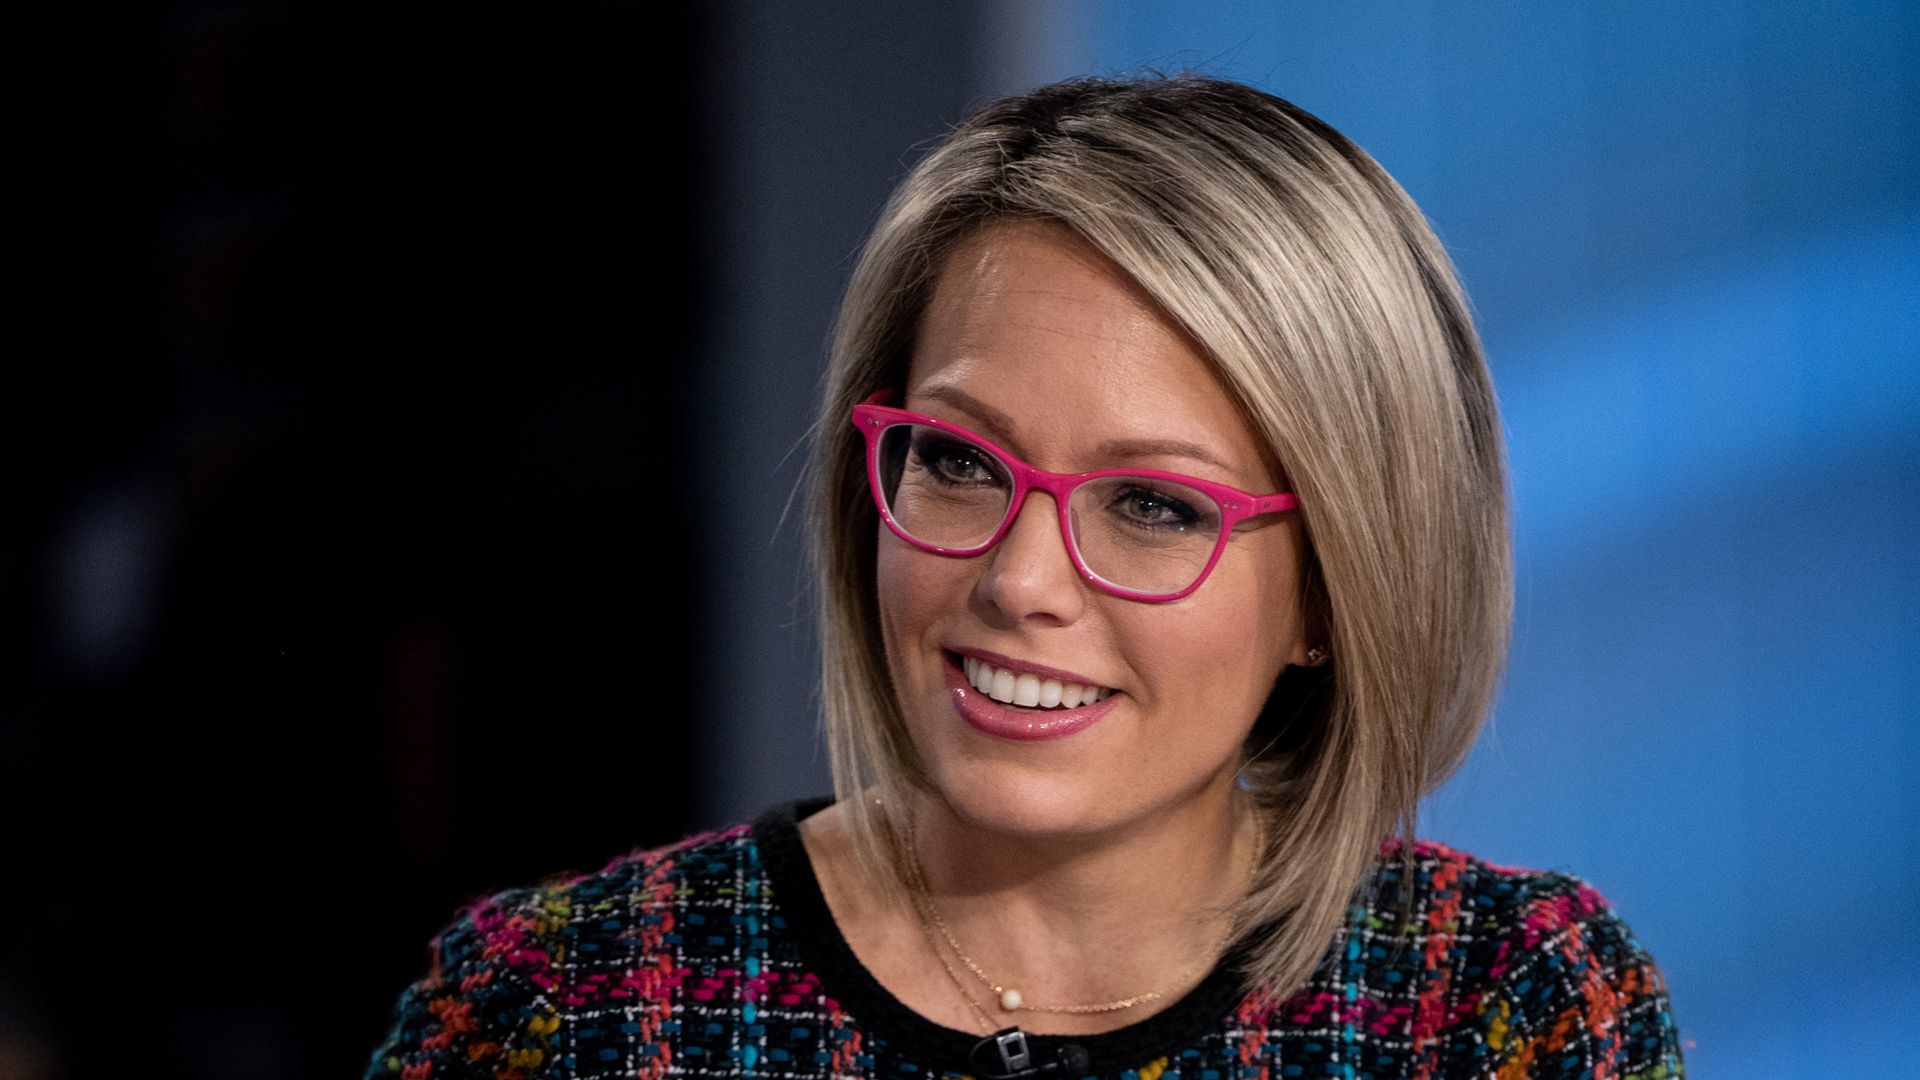 Dylan Dreyer on the Today Show